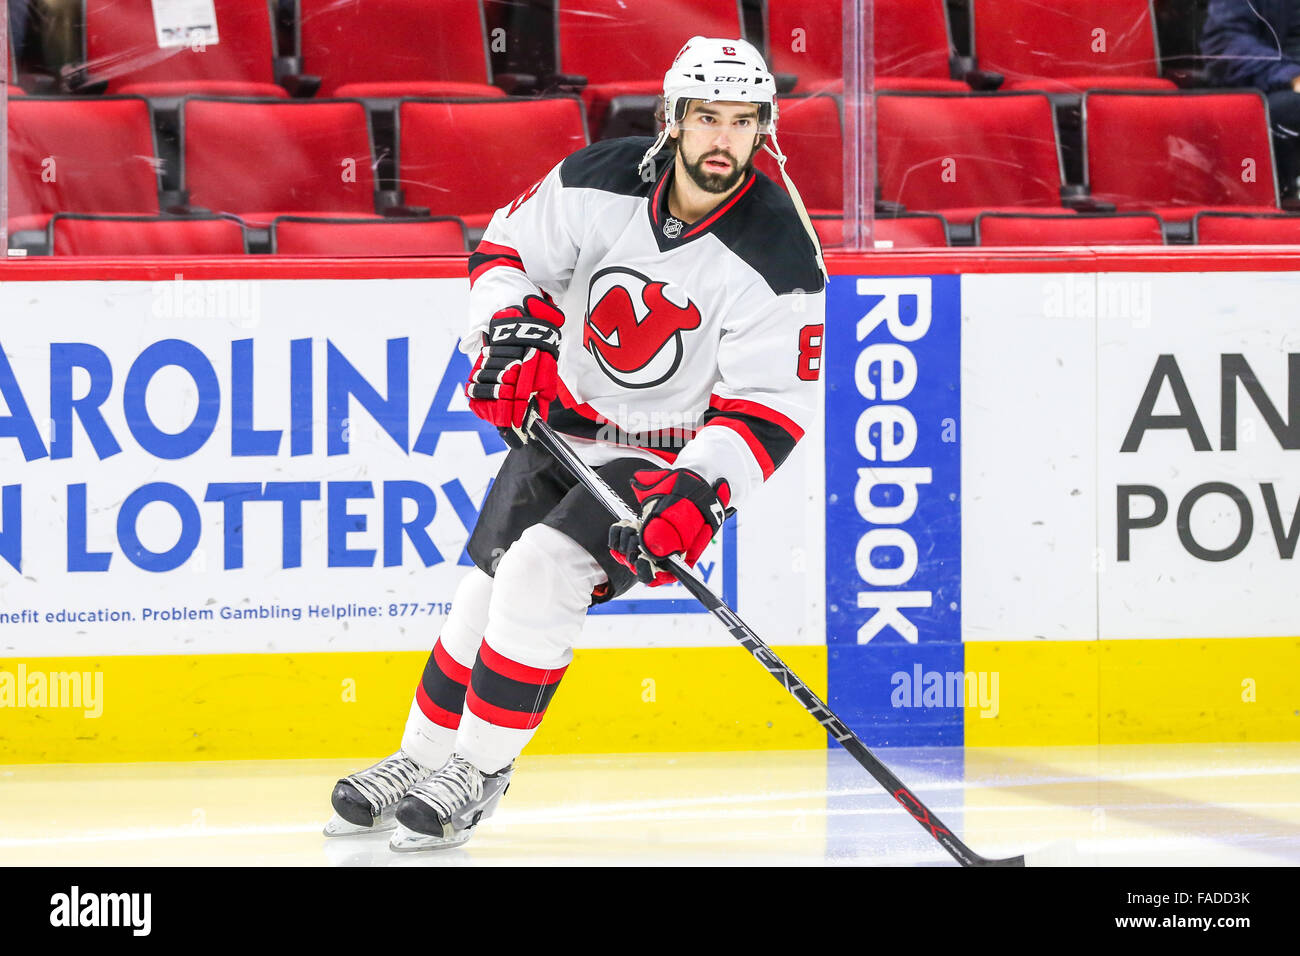 Discount New Jersey Devils tickets - New Jersey Education